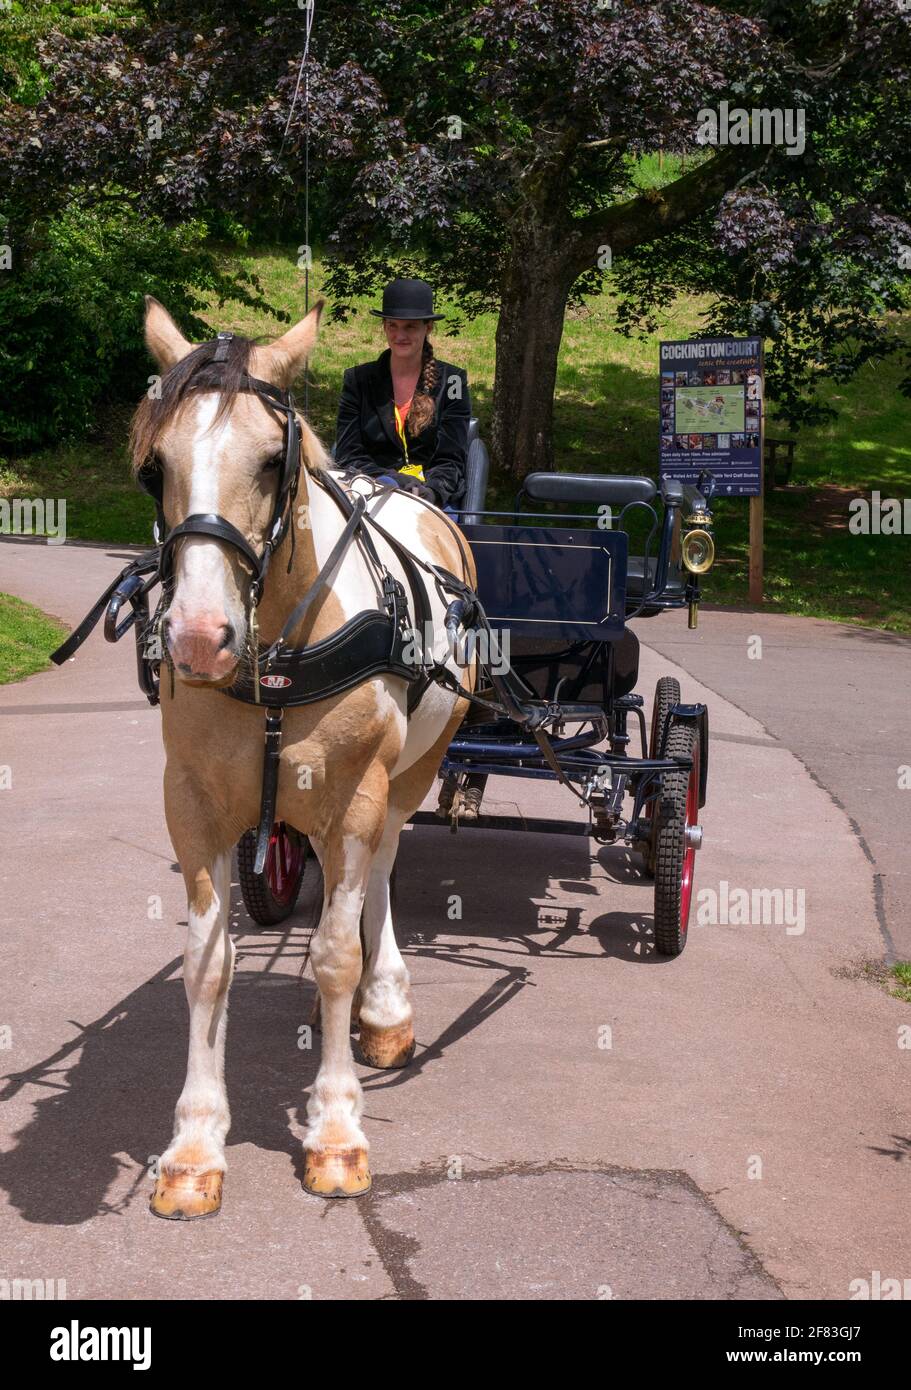 Rider with Horse & Carriage Ride in The Historic Village of Cockington, Torquay, Devon, England, UK, Stock Photo